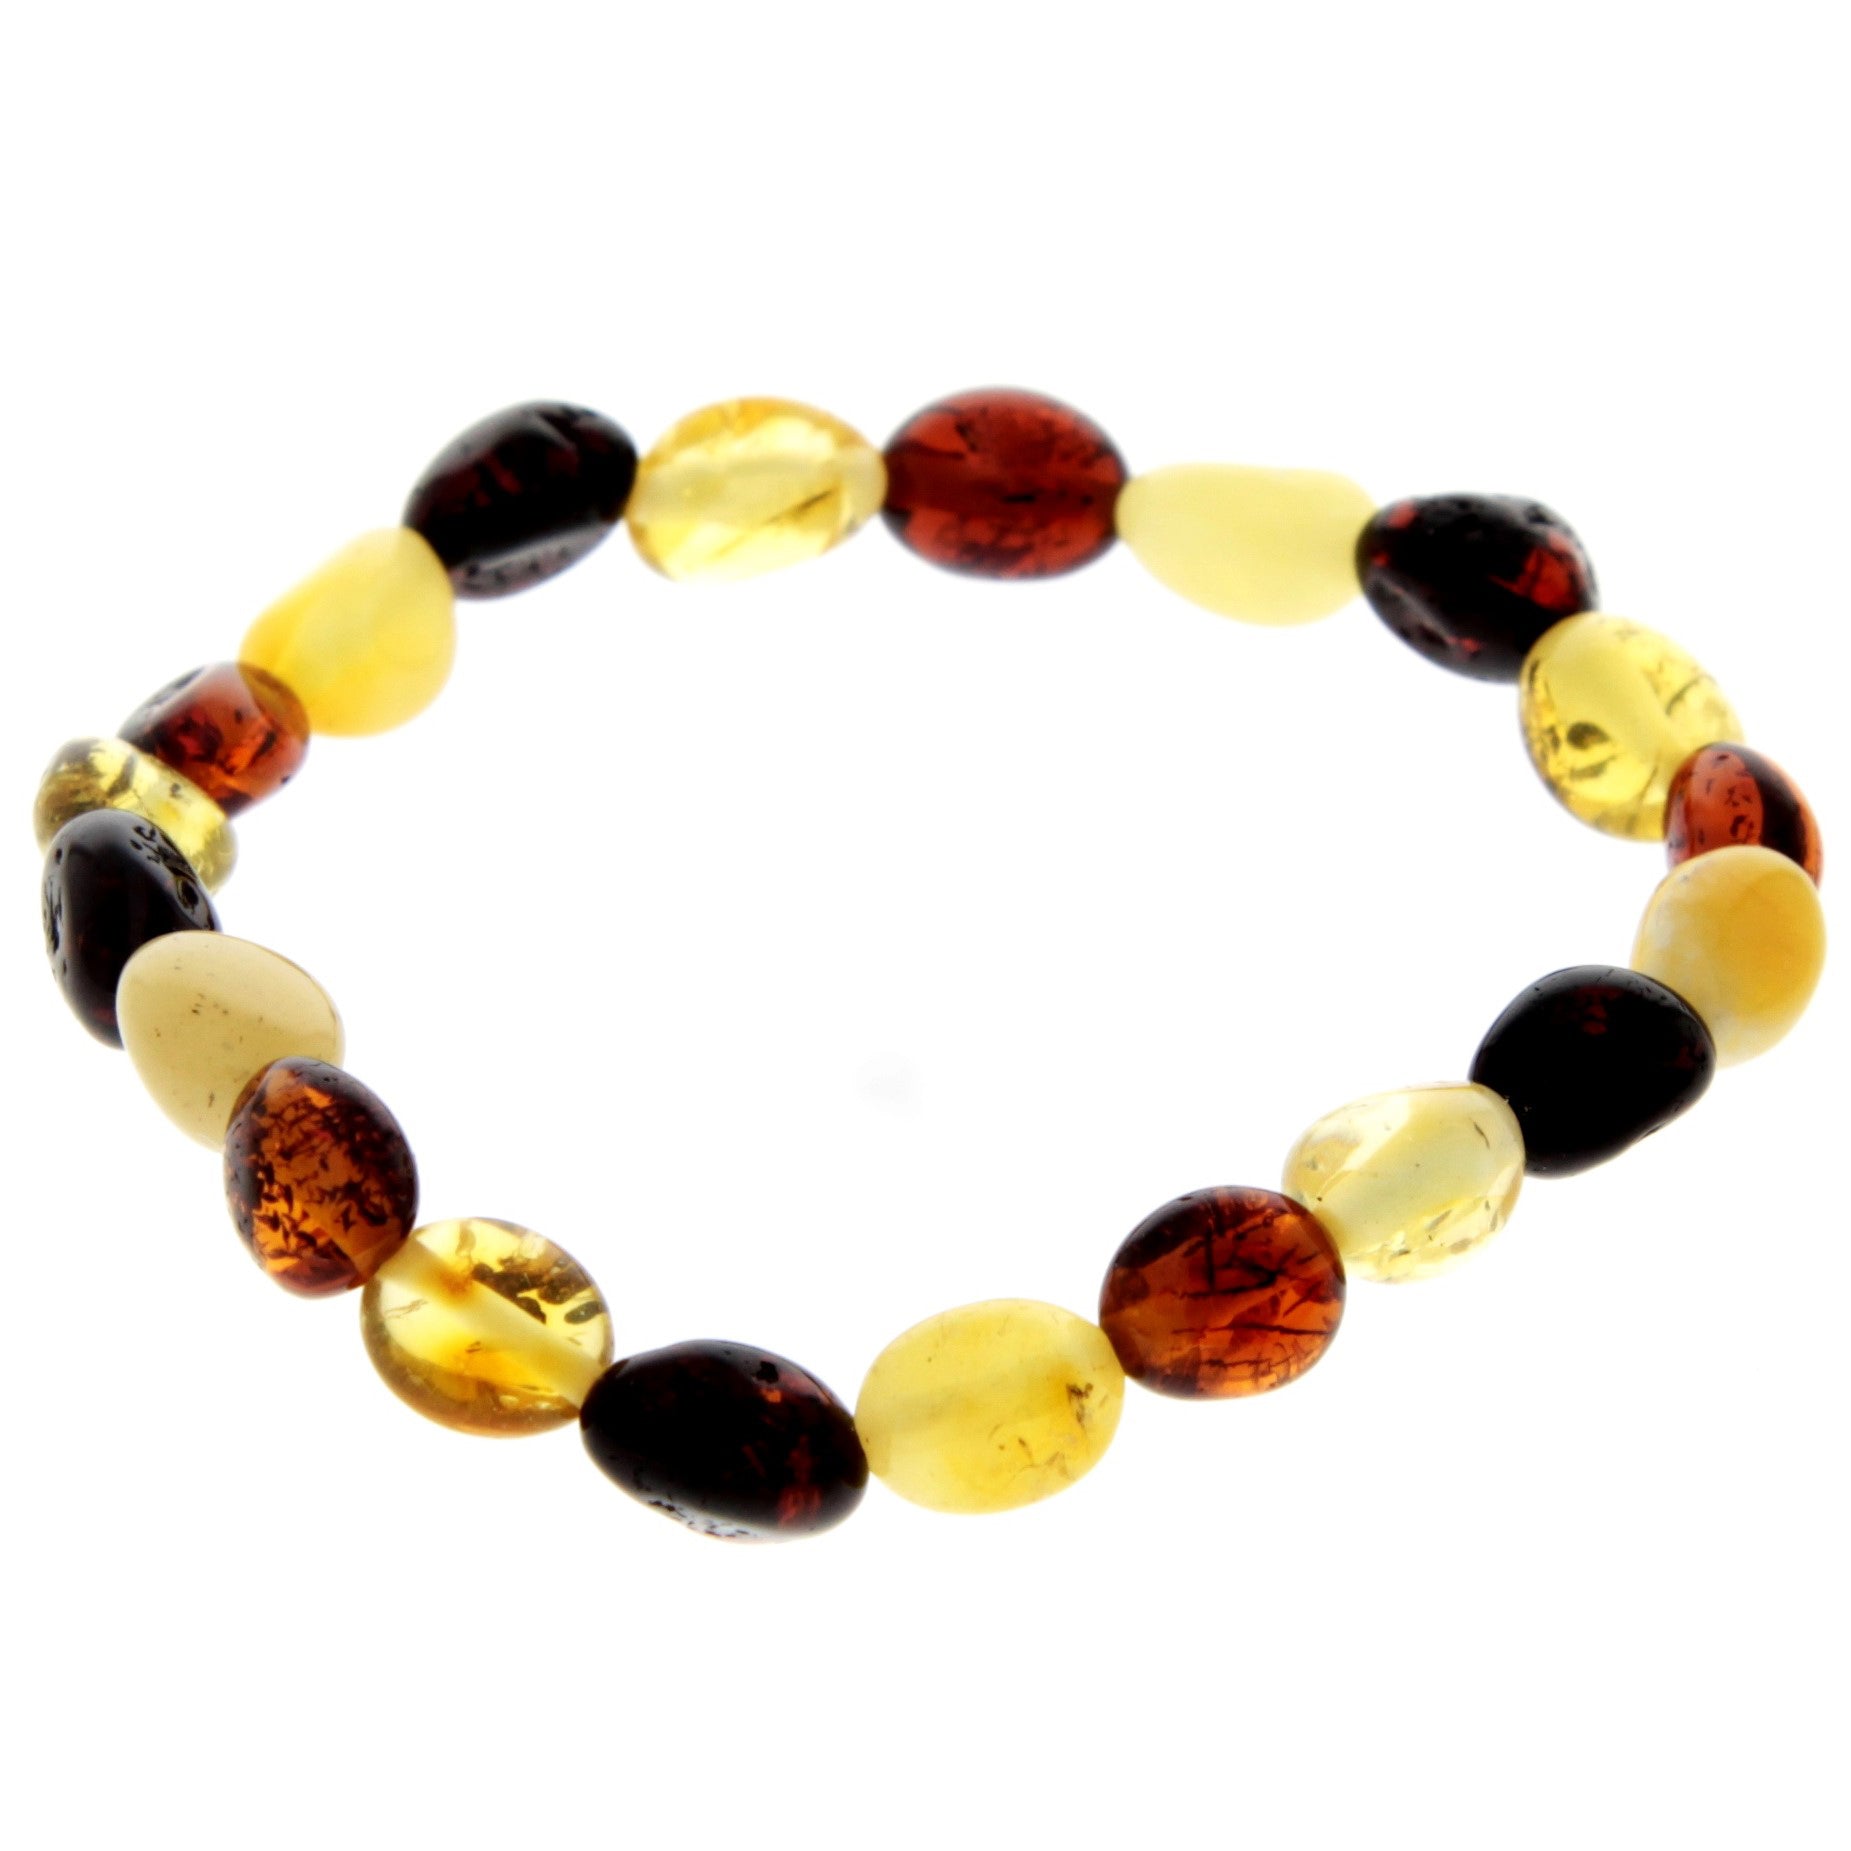 Certified Baltic Amber Bean Beads Bracelet Elasticated - Sizes Child to Adult